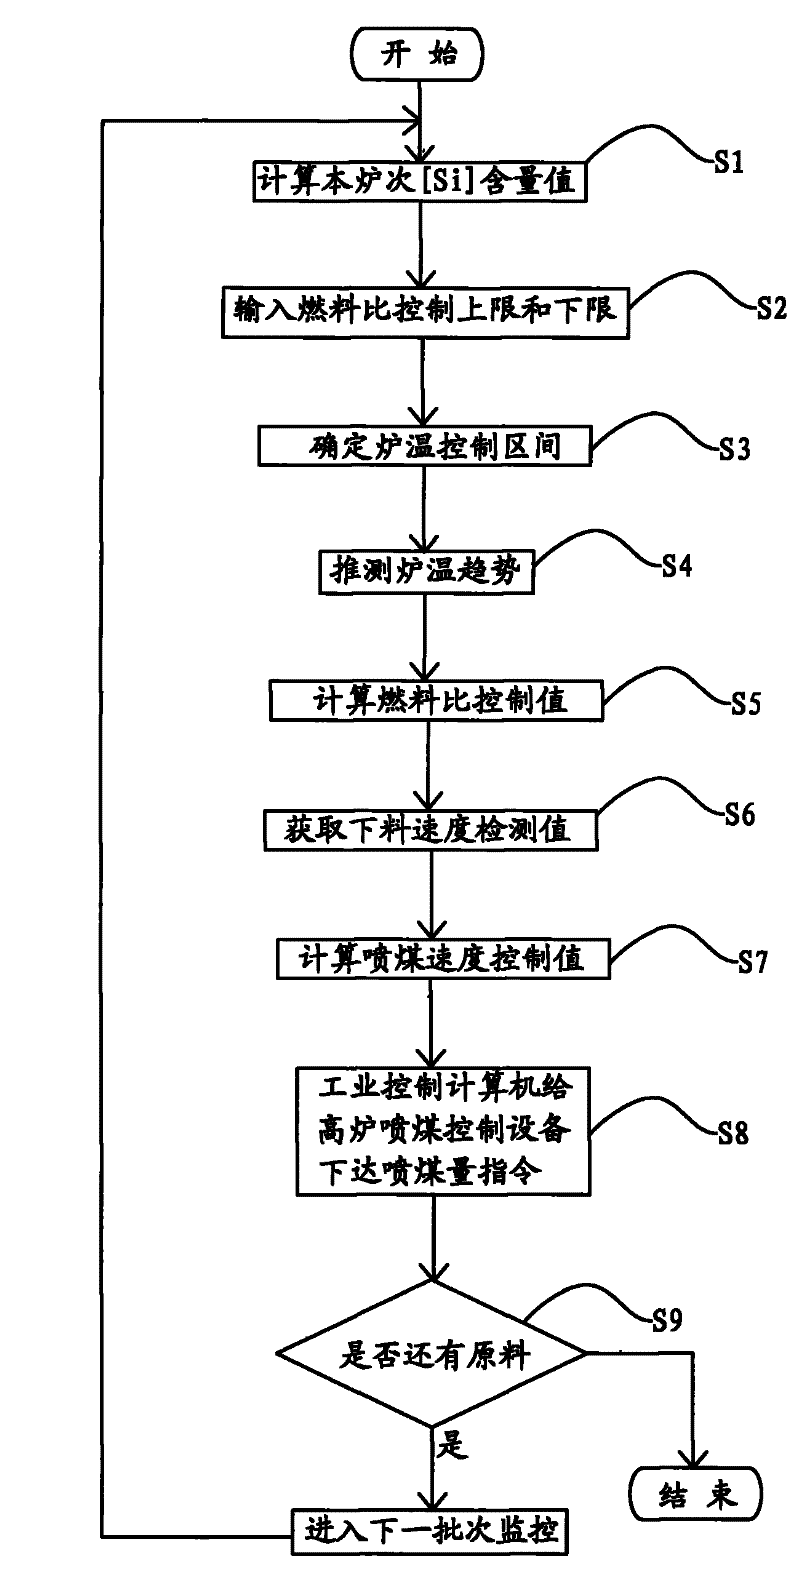 Method and system for monitoring fuel ratio of blast furnace in real time